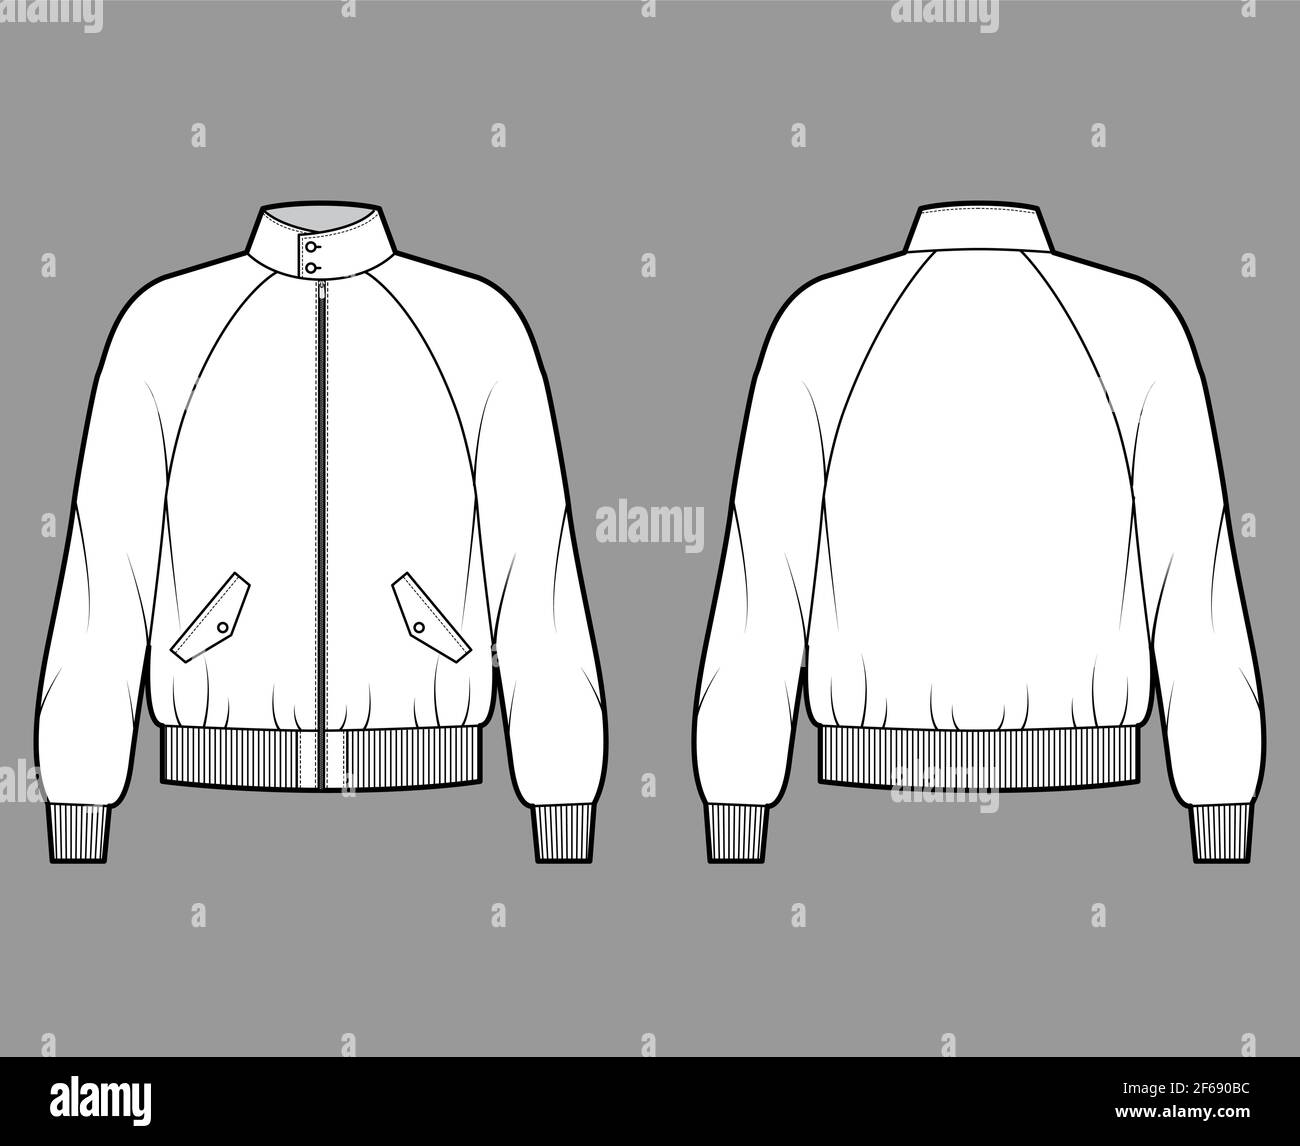 Zip-up Harrington Bomber jacket technical fashion illustration with Rib cuffs, oversized, long raglan sleeves, flap pockets. Flat coat template front, back white color. Women men unisex top CAD mockup Stock Vector